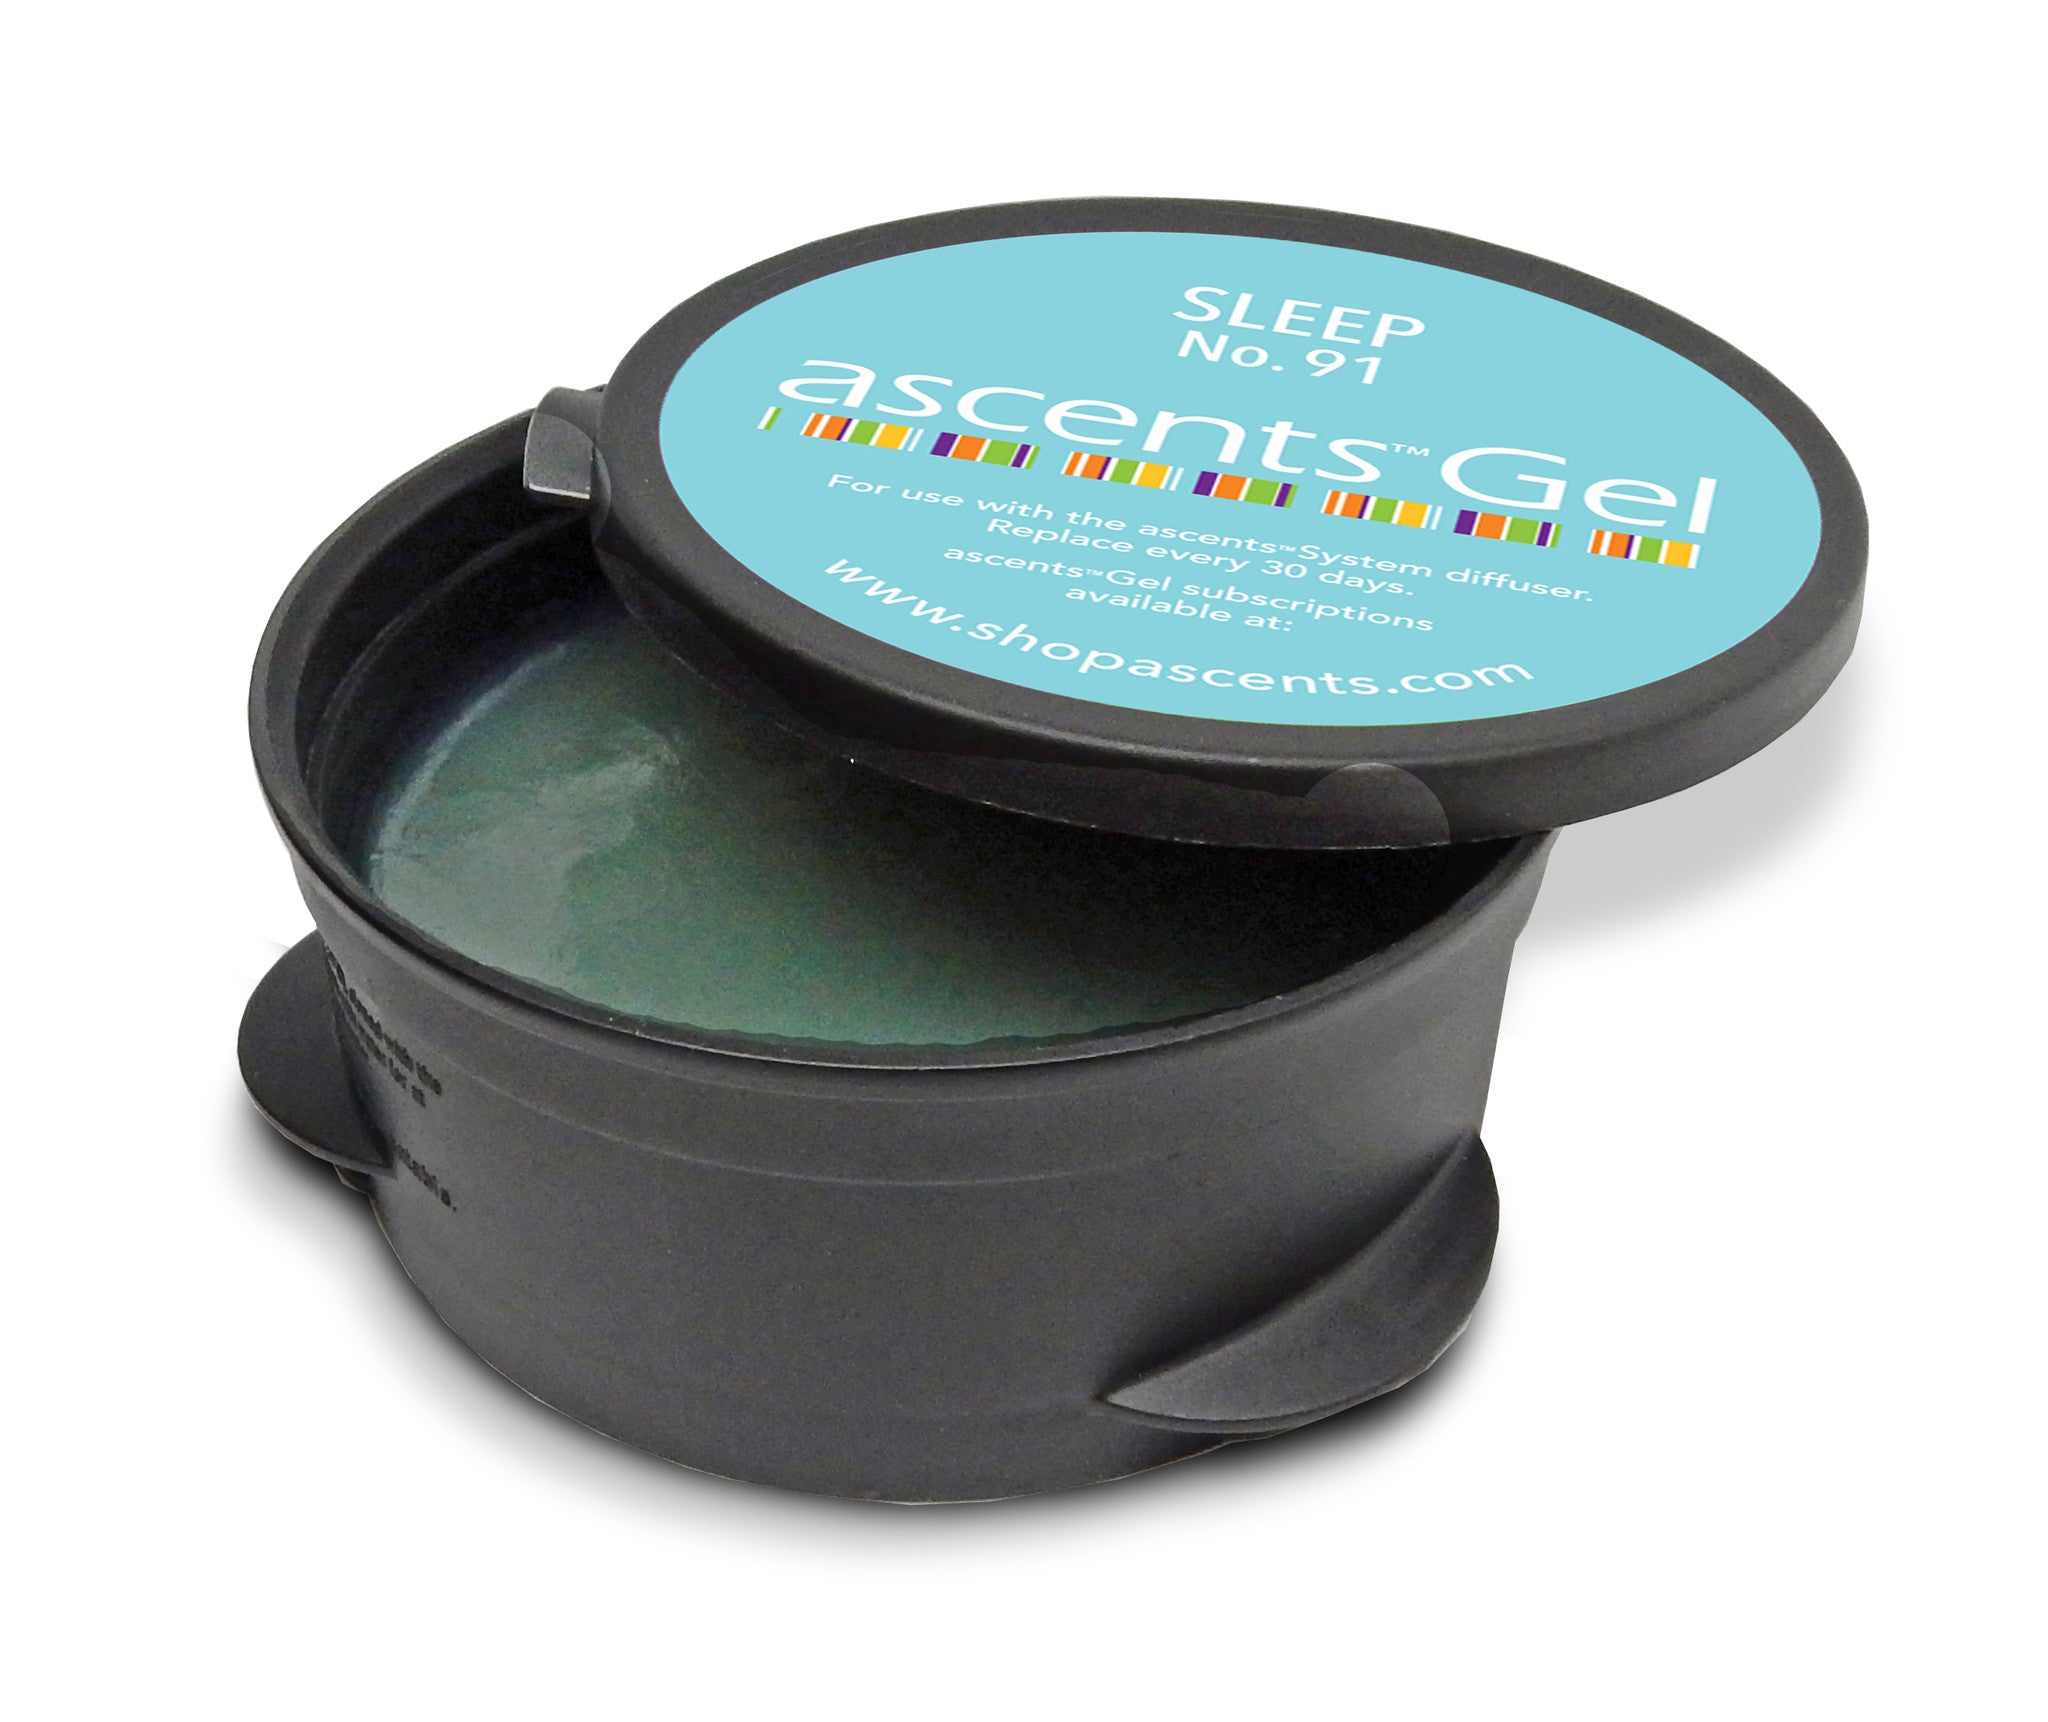 Essential Oil GEL - SLEEP No. 91 - Clinical Aromatherapy for Insomnia & Restlessness